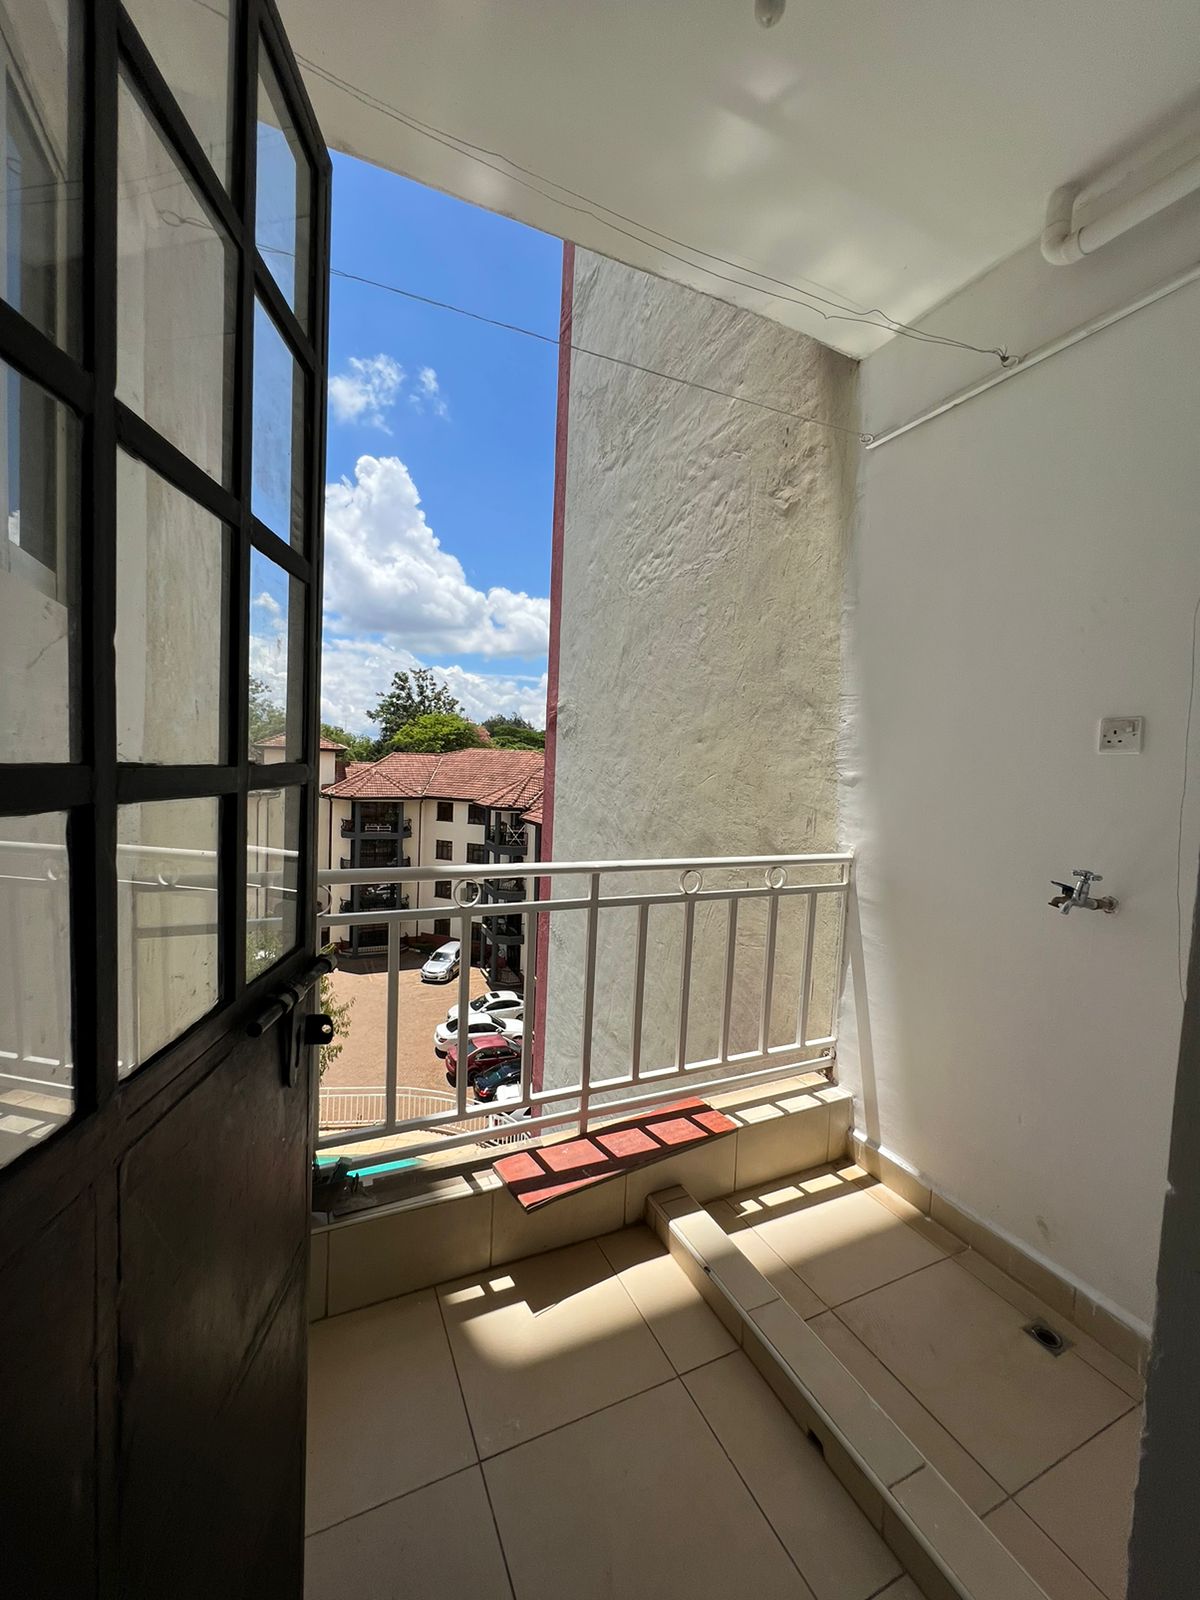 2 bedroom apartment to let in the heart of Kilimani, Nairobi. Has swimming pool, ample car parking, master bedroom en suite. Rent: 60,000. Musili homes